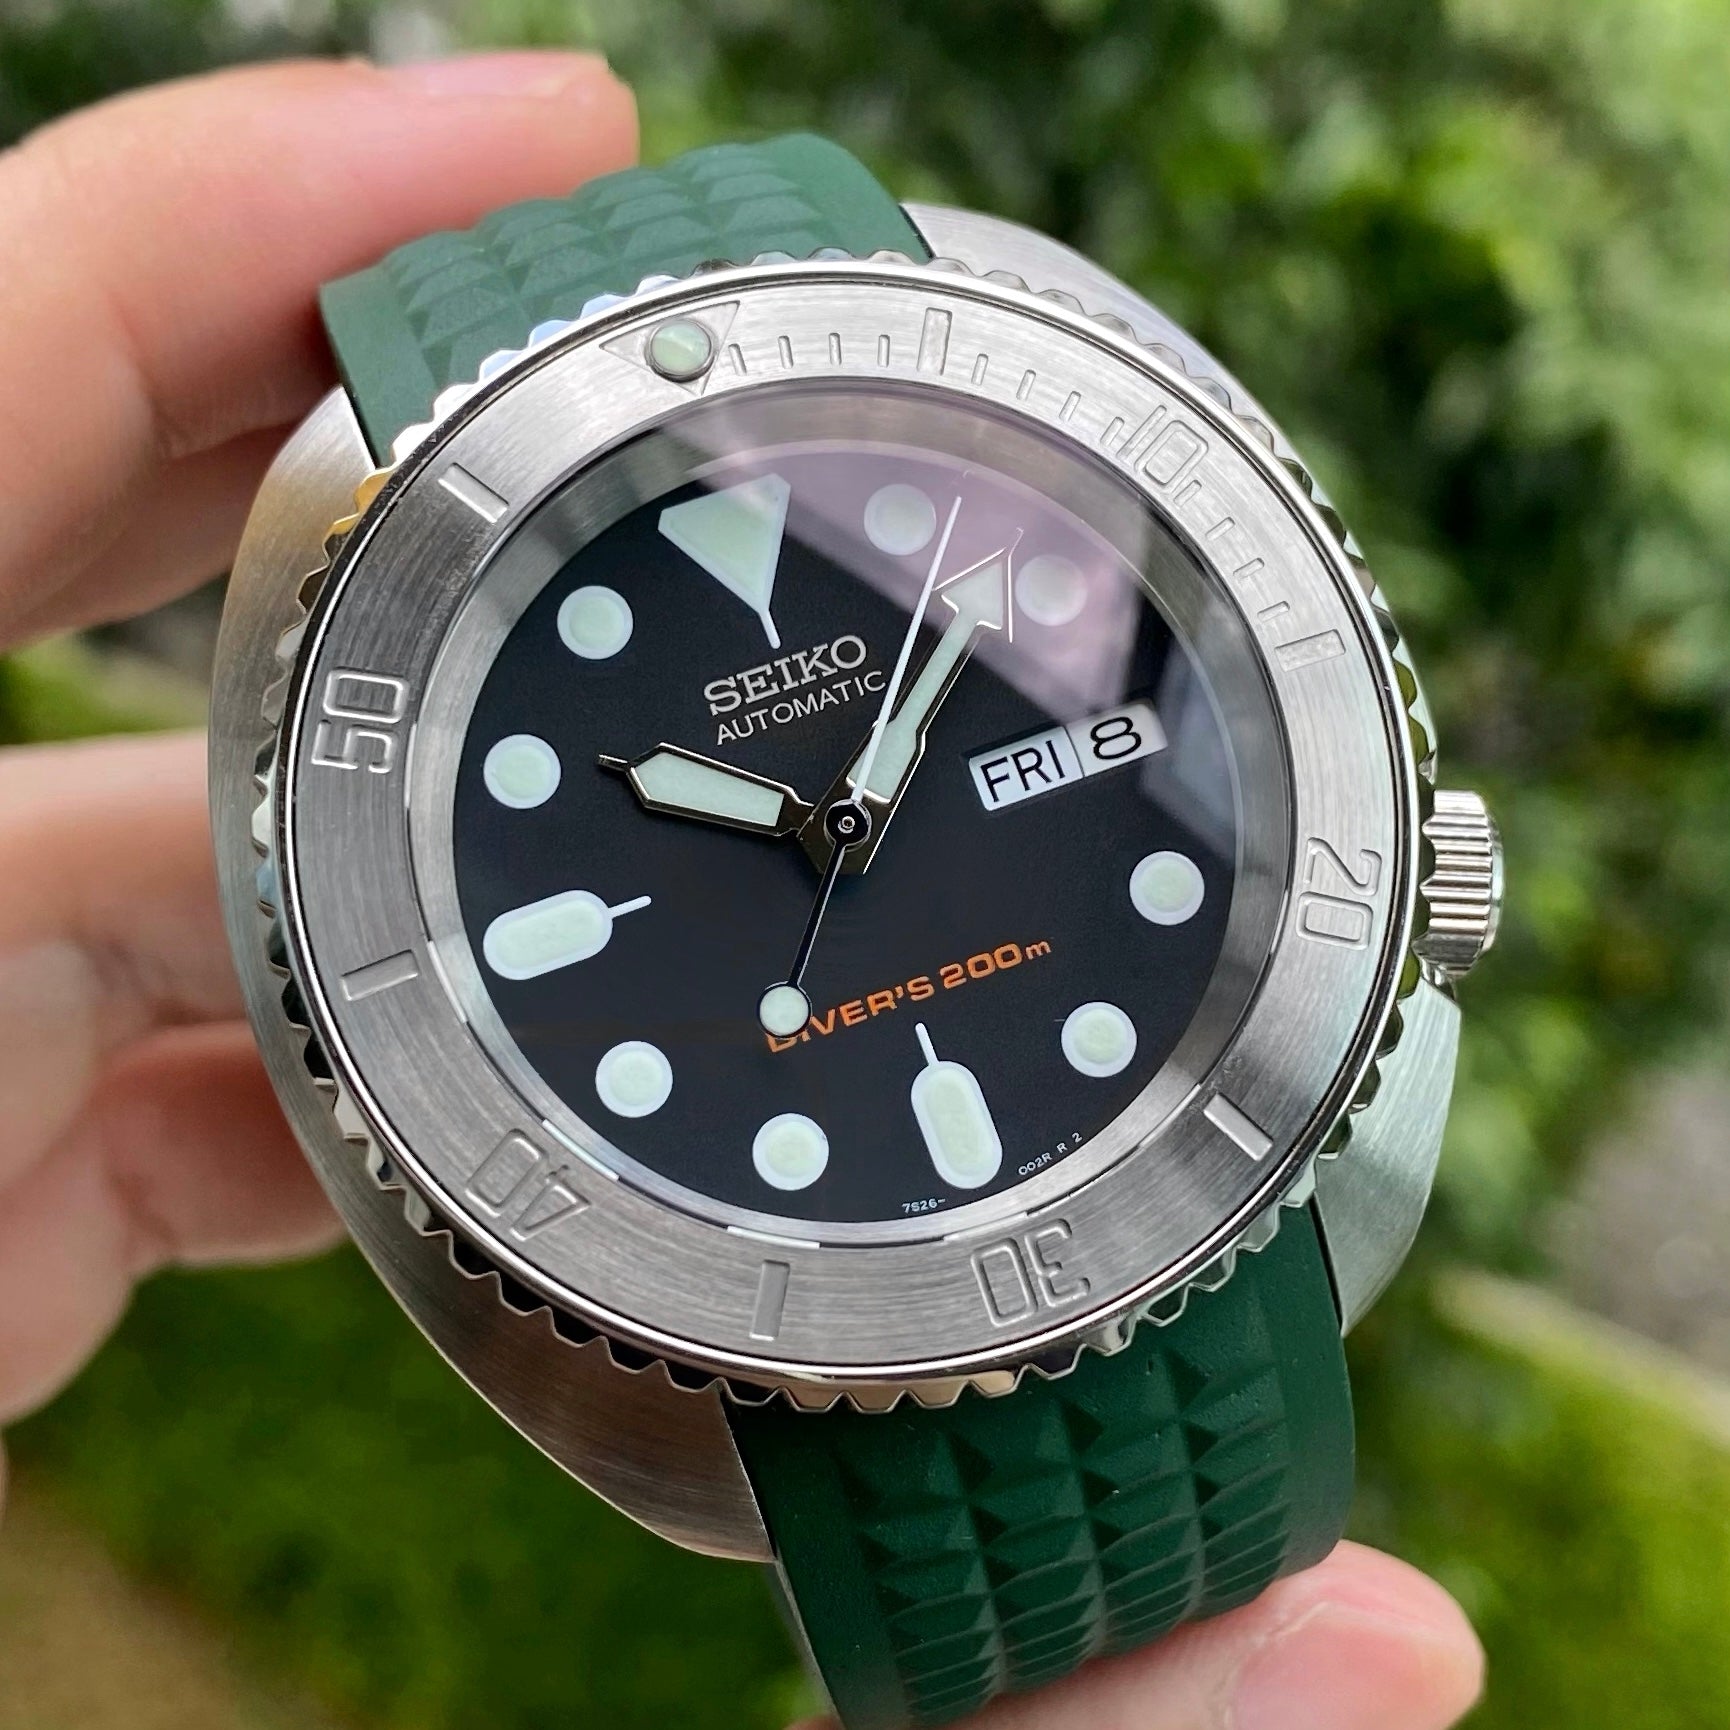 Case - SKX007 Turtle - Polished Steel (With Case Back) - DLW WATCHES